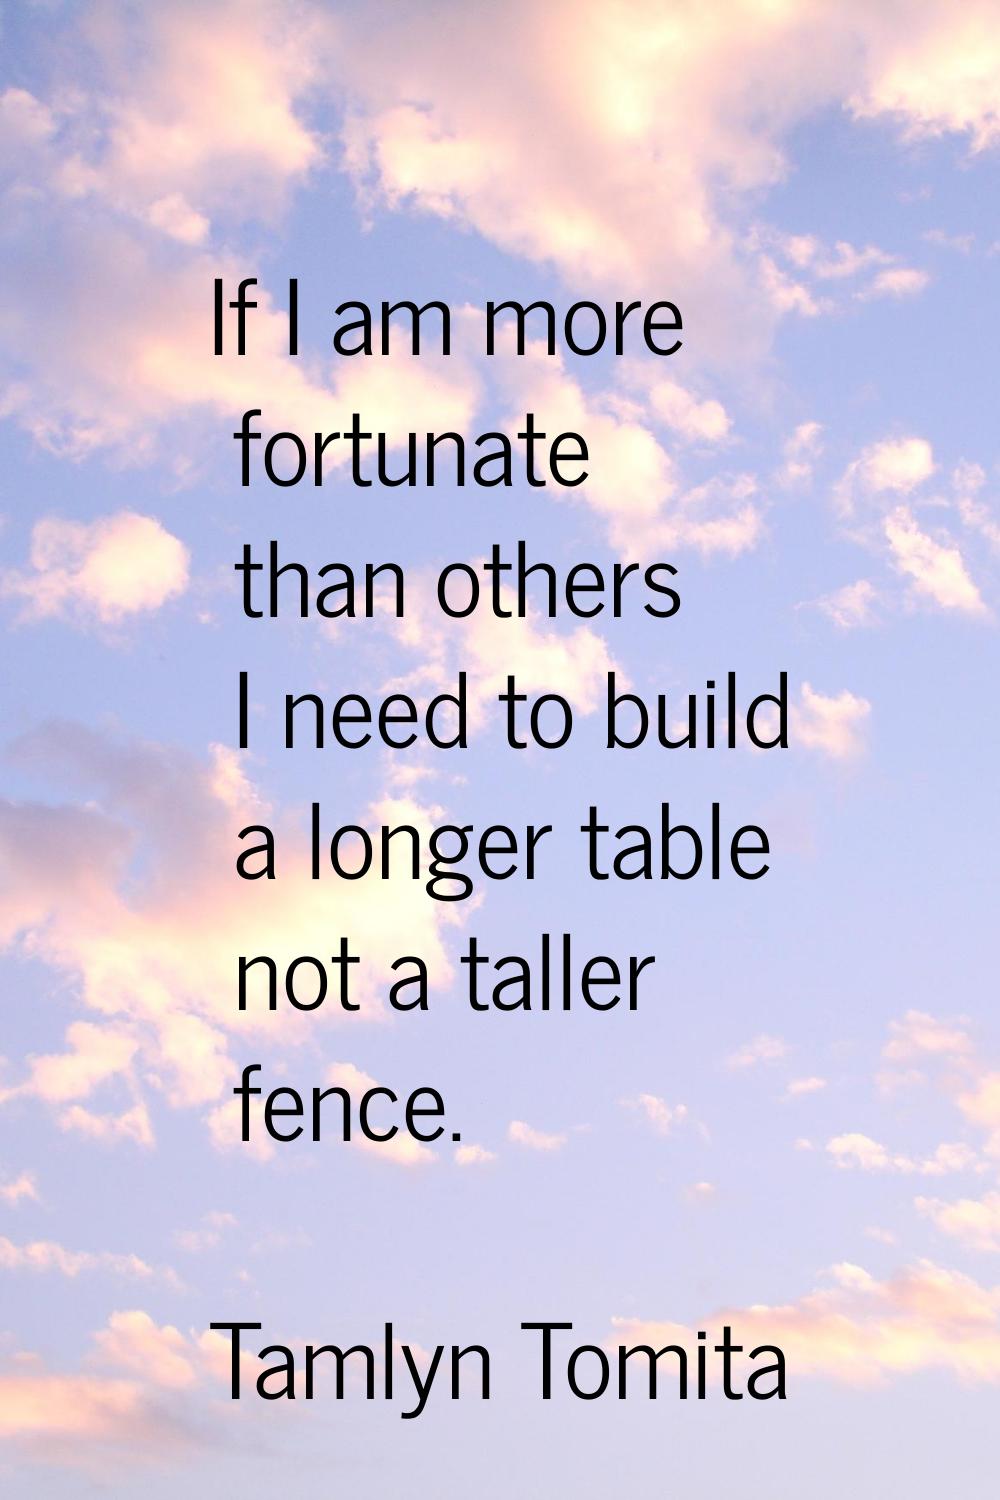 If I am more fortunate than others I need to build a longer table not a taller fence.